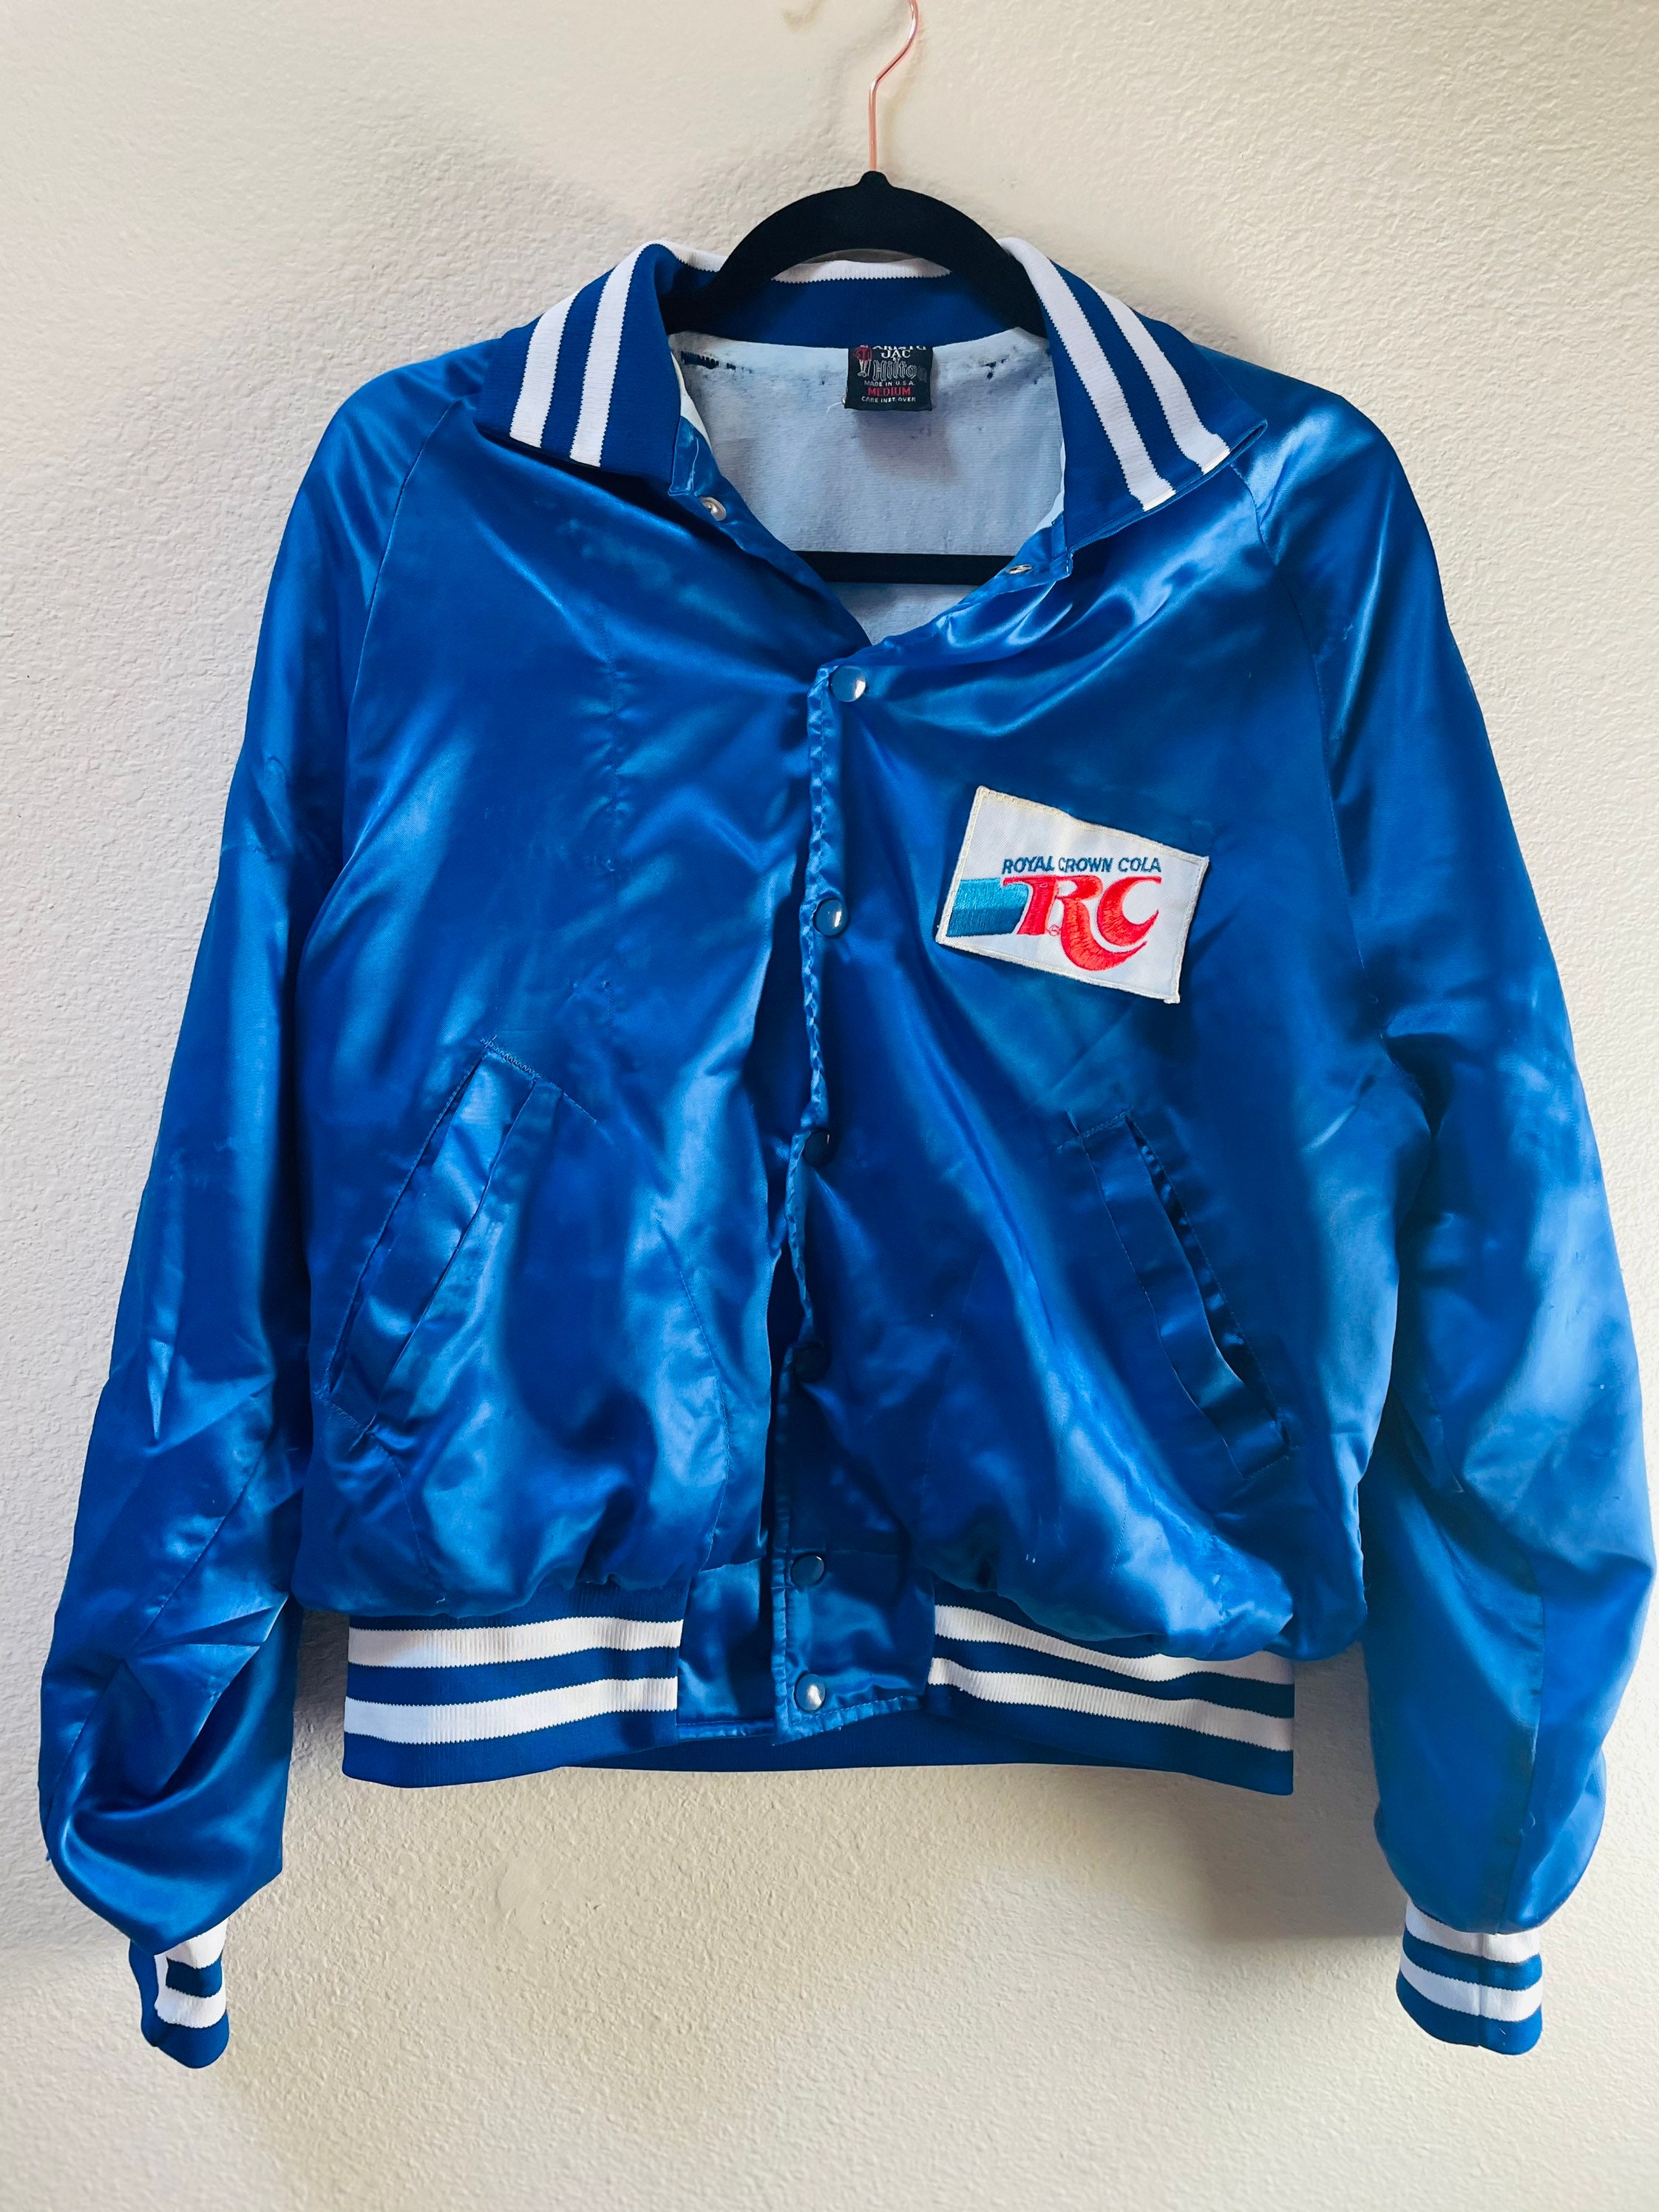 1980s Royal Crown RC Cola bomber Promo Jacket in Blue satin | Etsy